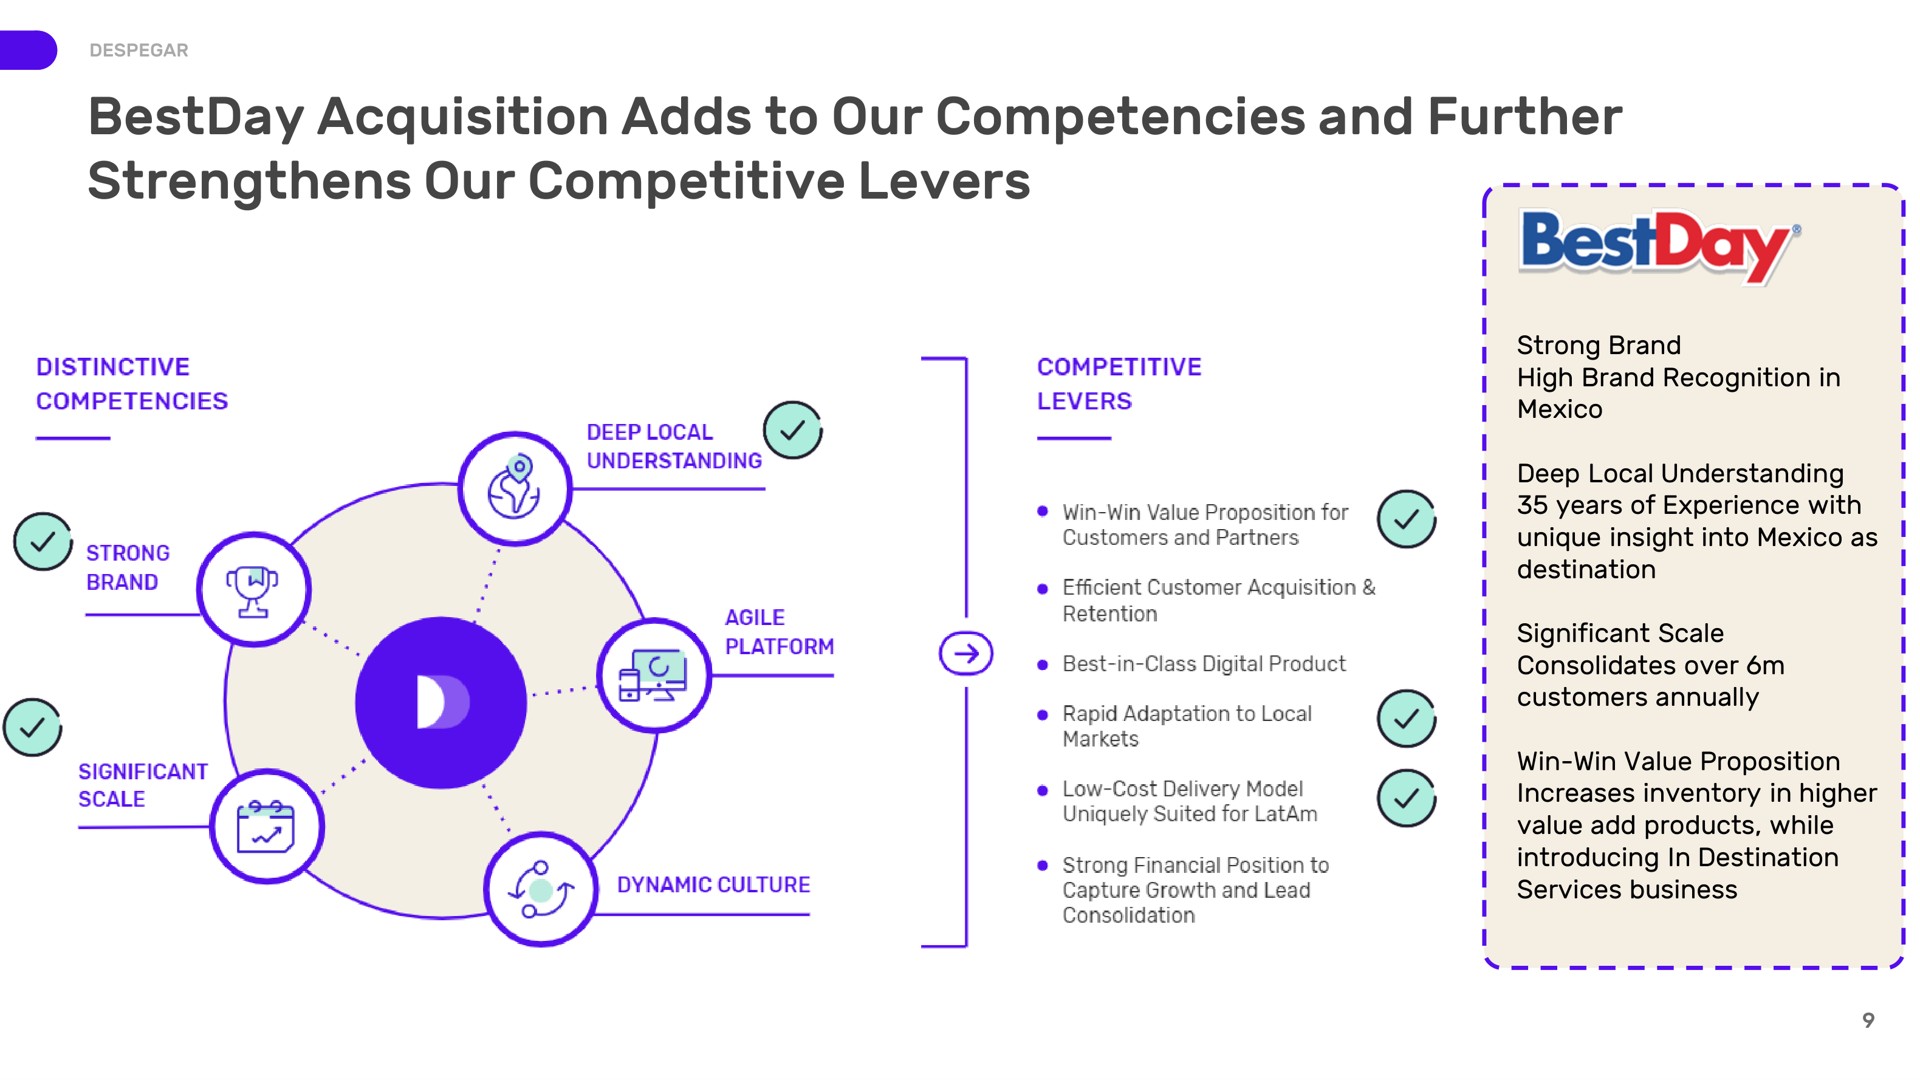 acquisition adds to our competencies and further strengthens our competitive levers | Despegar